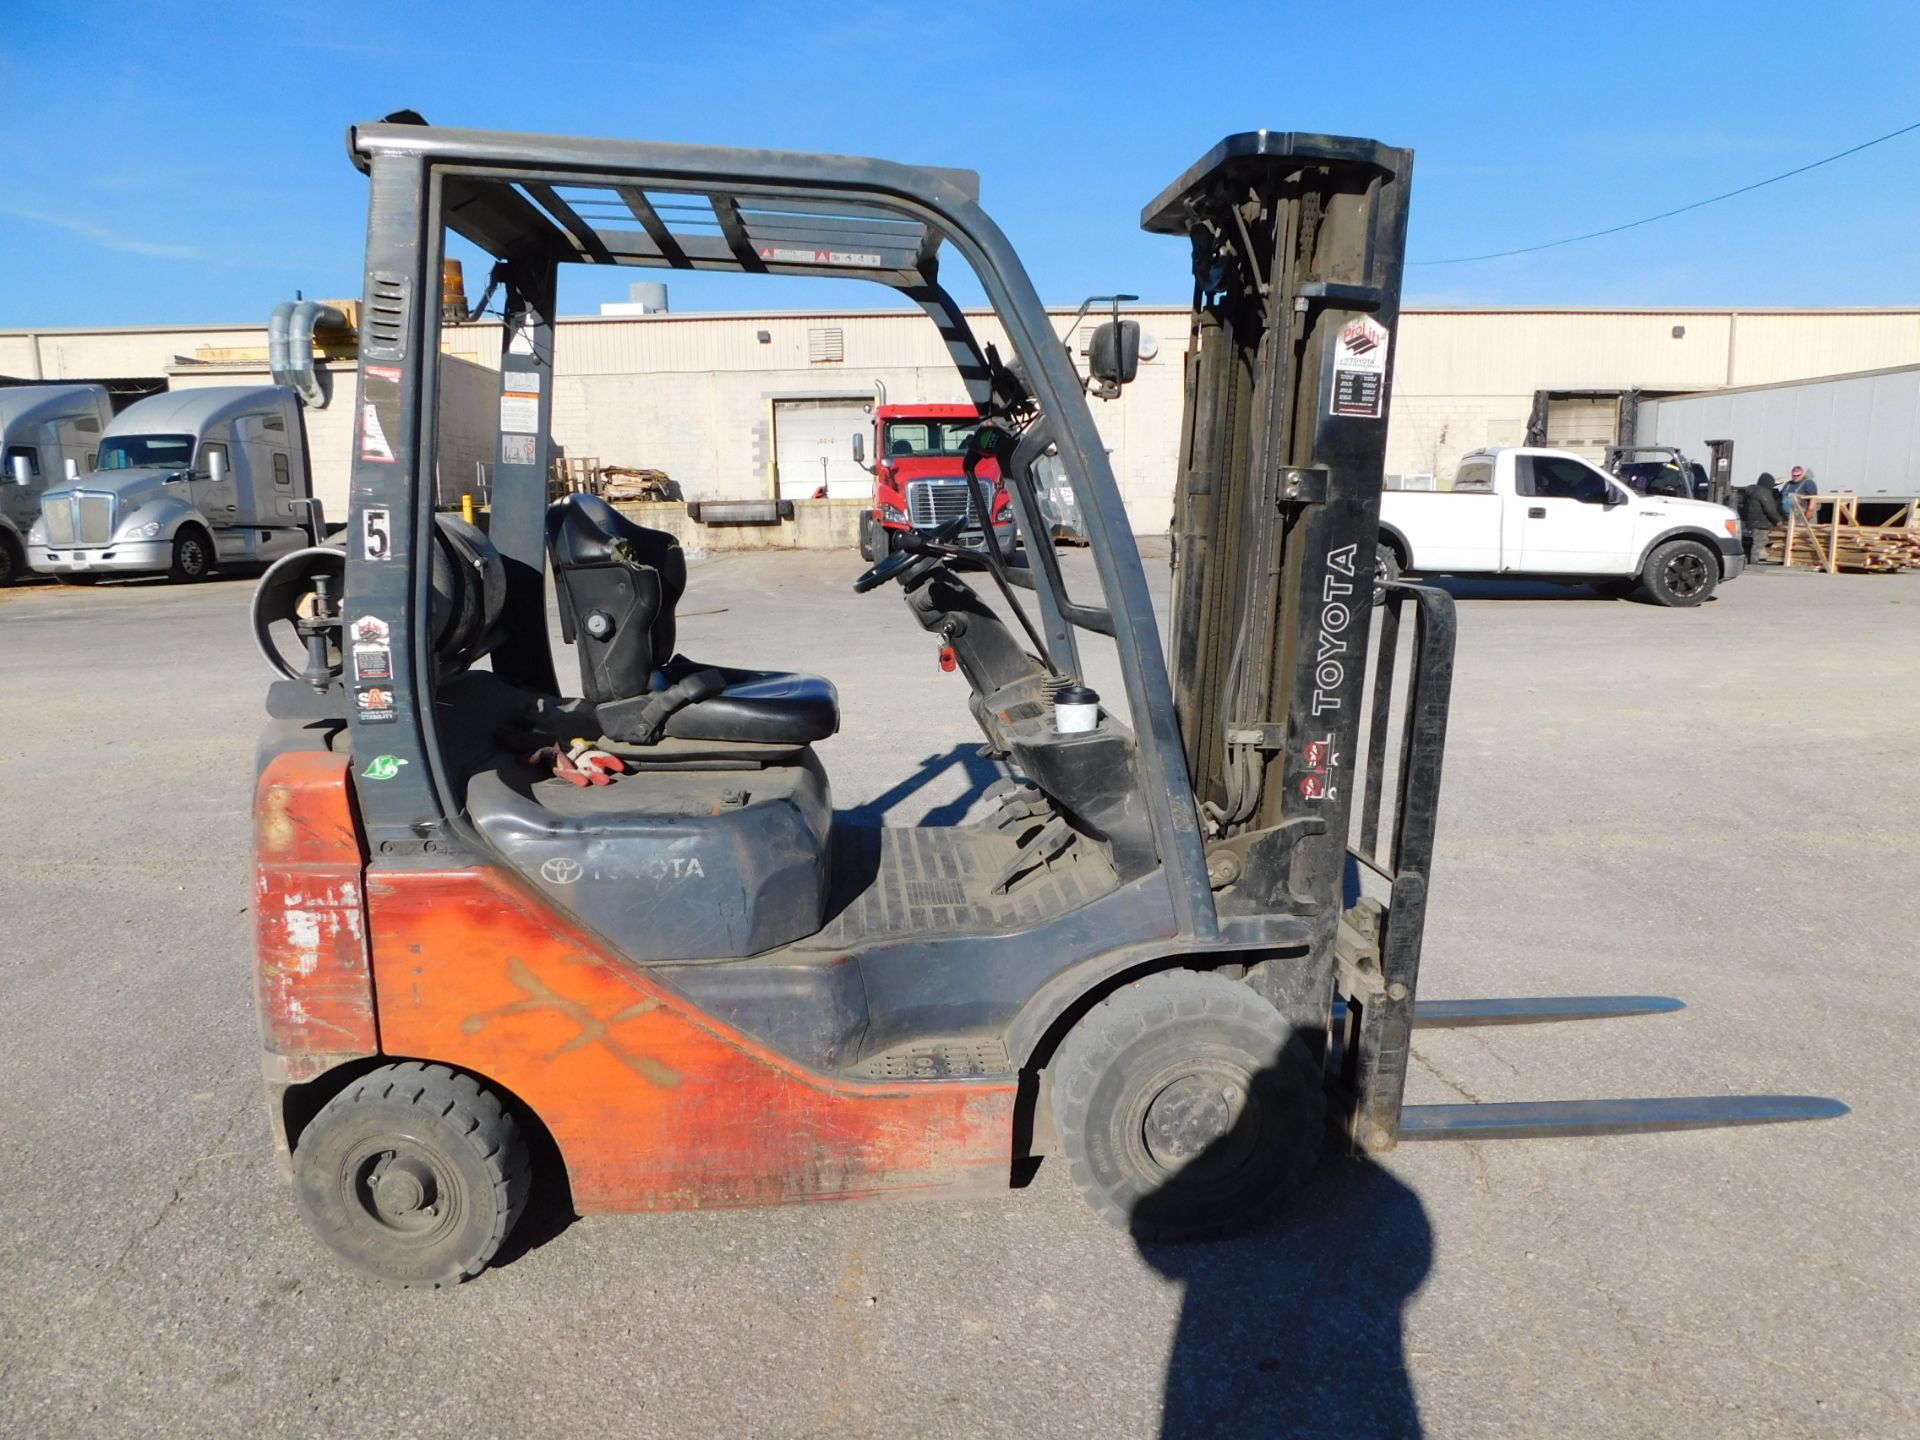 Toyota 8FGU15 Fork Lift Truck, SN 64661, 2,500 lb. Max. Load Capacity, LP Gas Engine, Overhead - Image 7 of 20